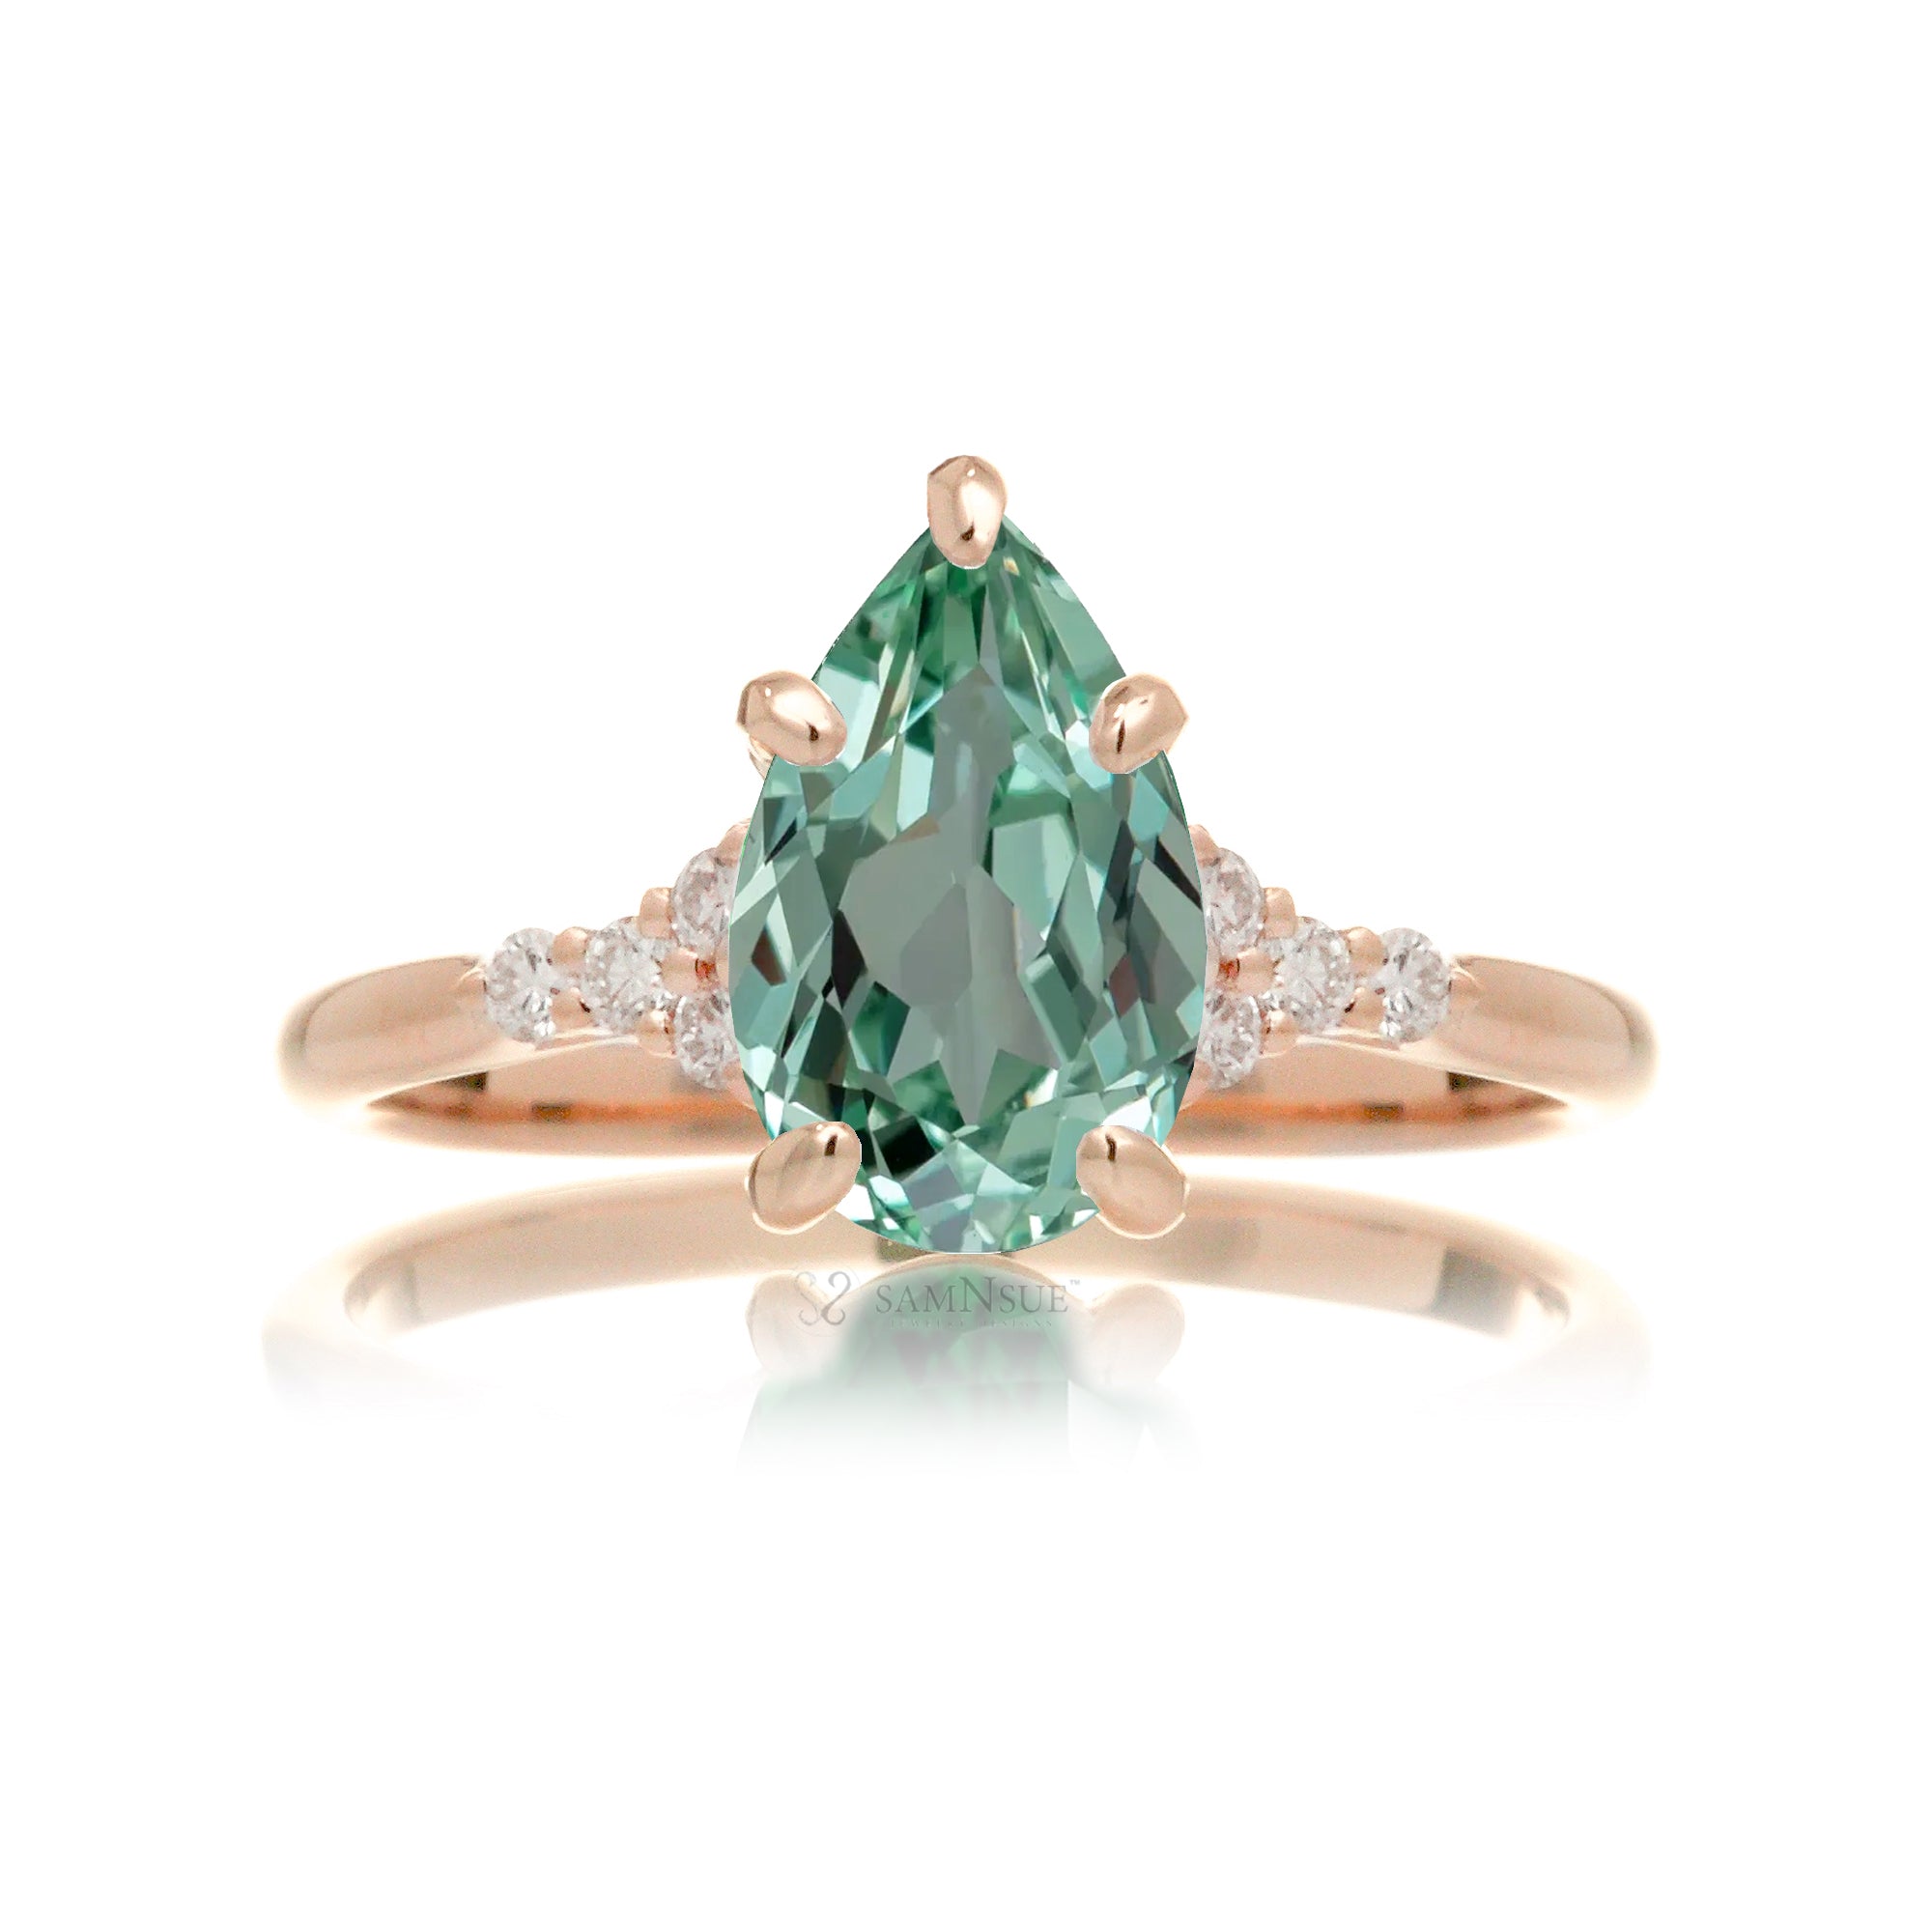 Pear cut green sapphire and diamond engagement ring in rose gold - the Chloe lab-grown